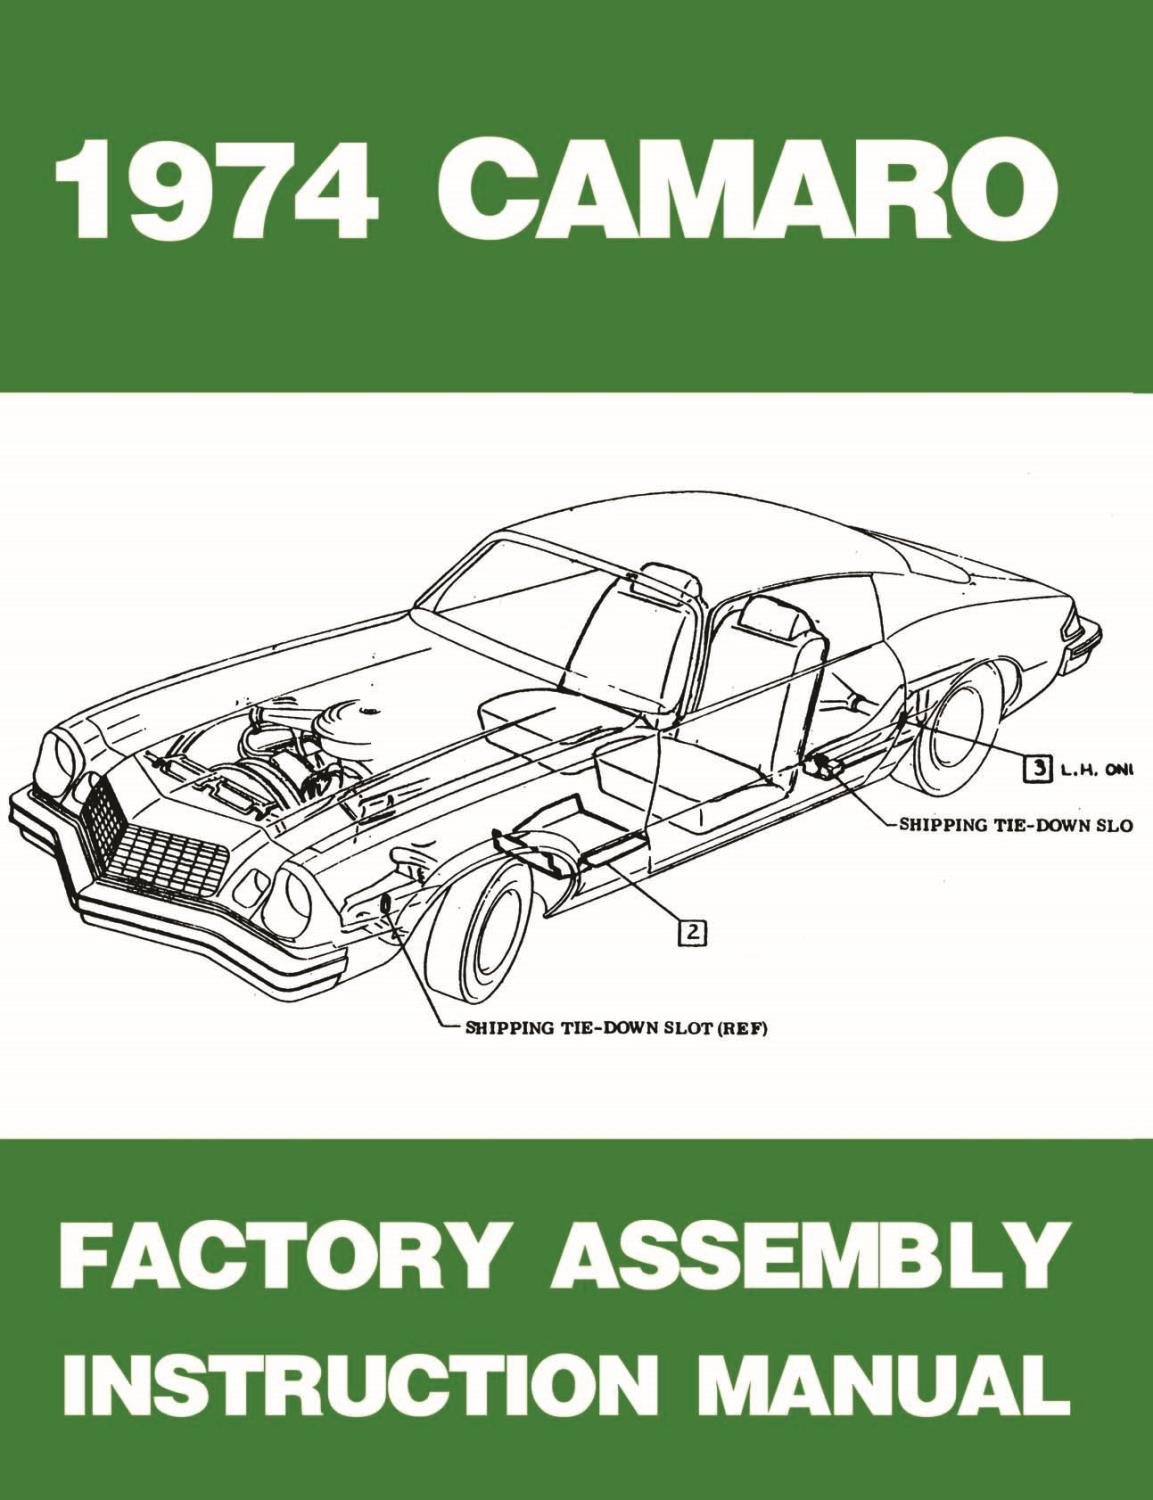 Factory Assembly Instruction Manual for 1974 Chevrolet Camaro